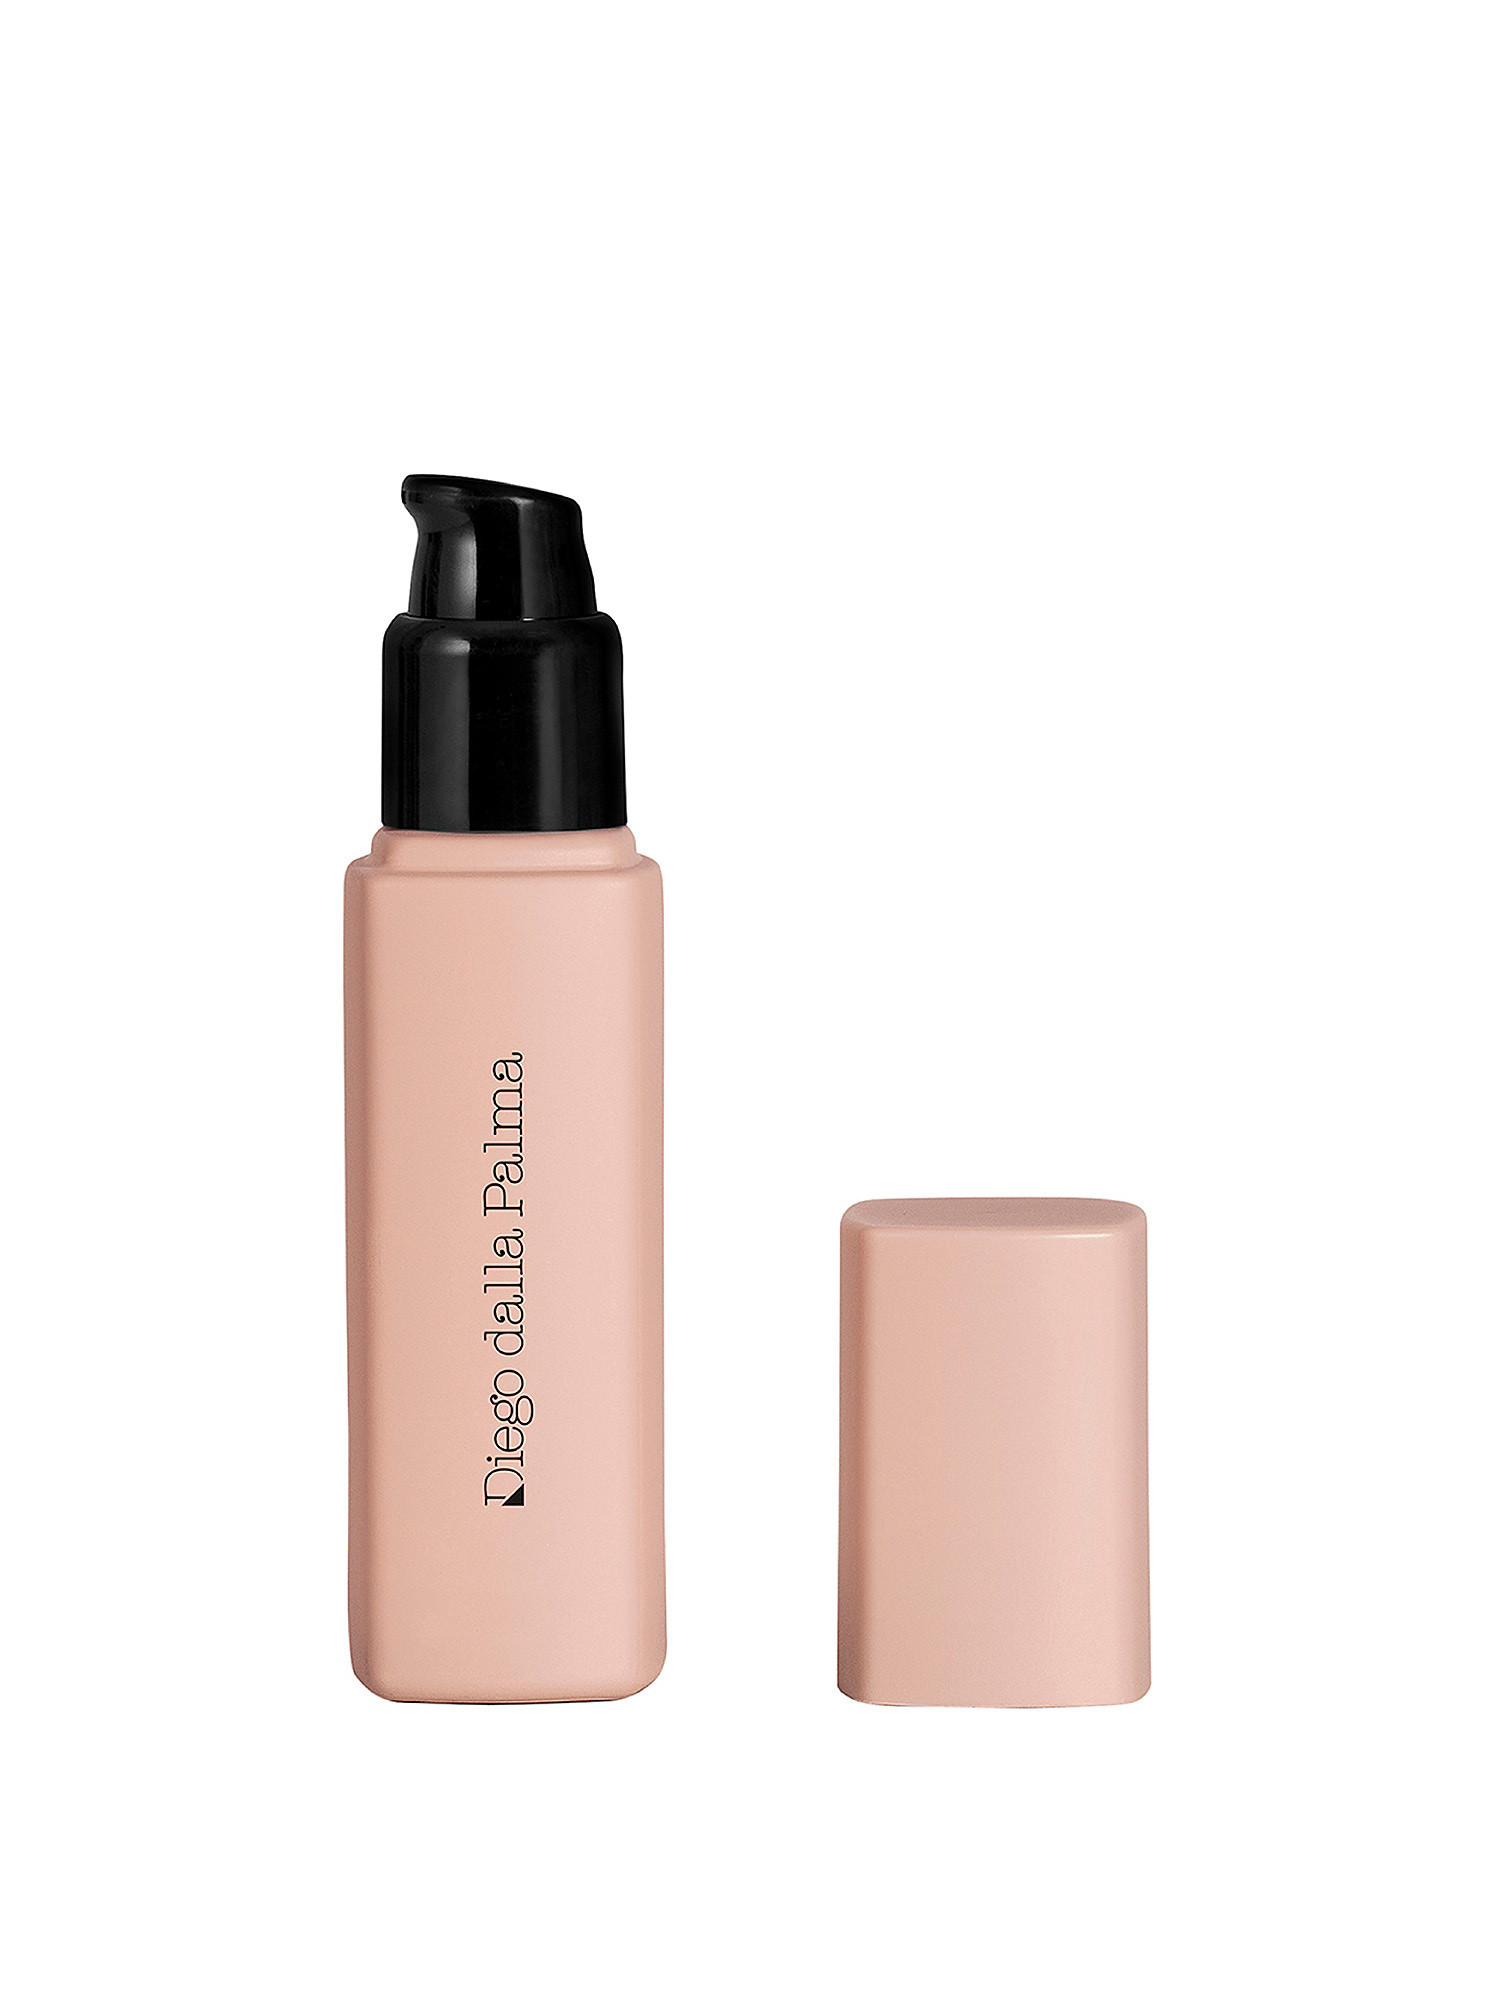 NUDISSIMO Naturally Matte Foundation - 244W, Sand, large image number 0